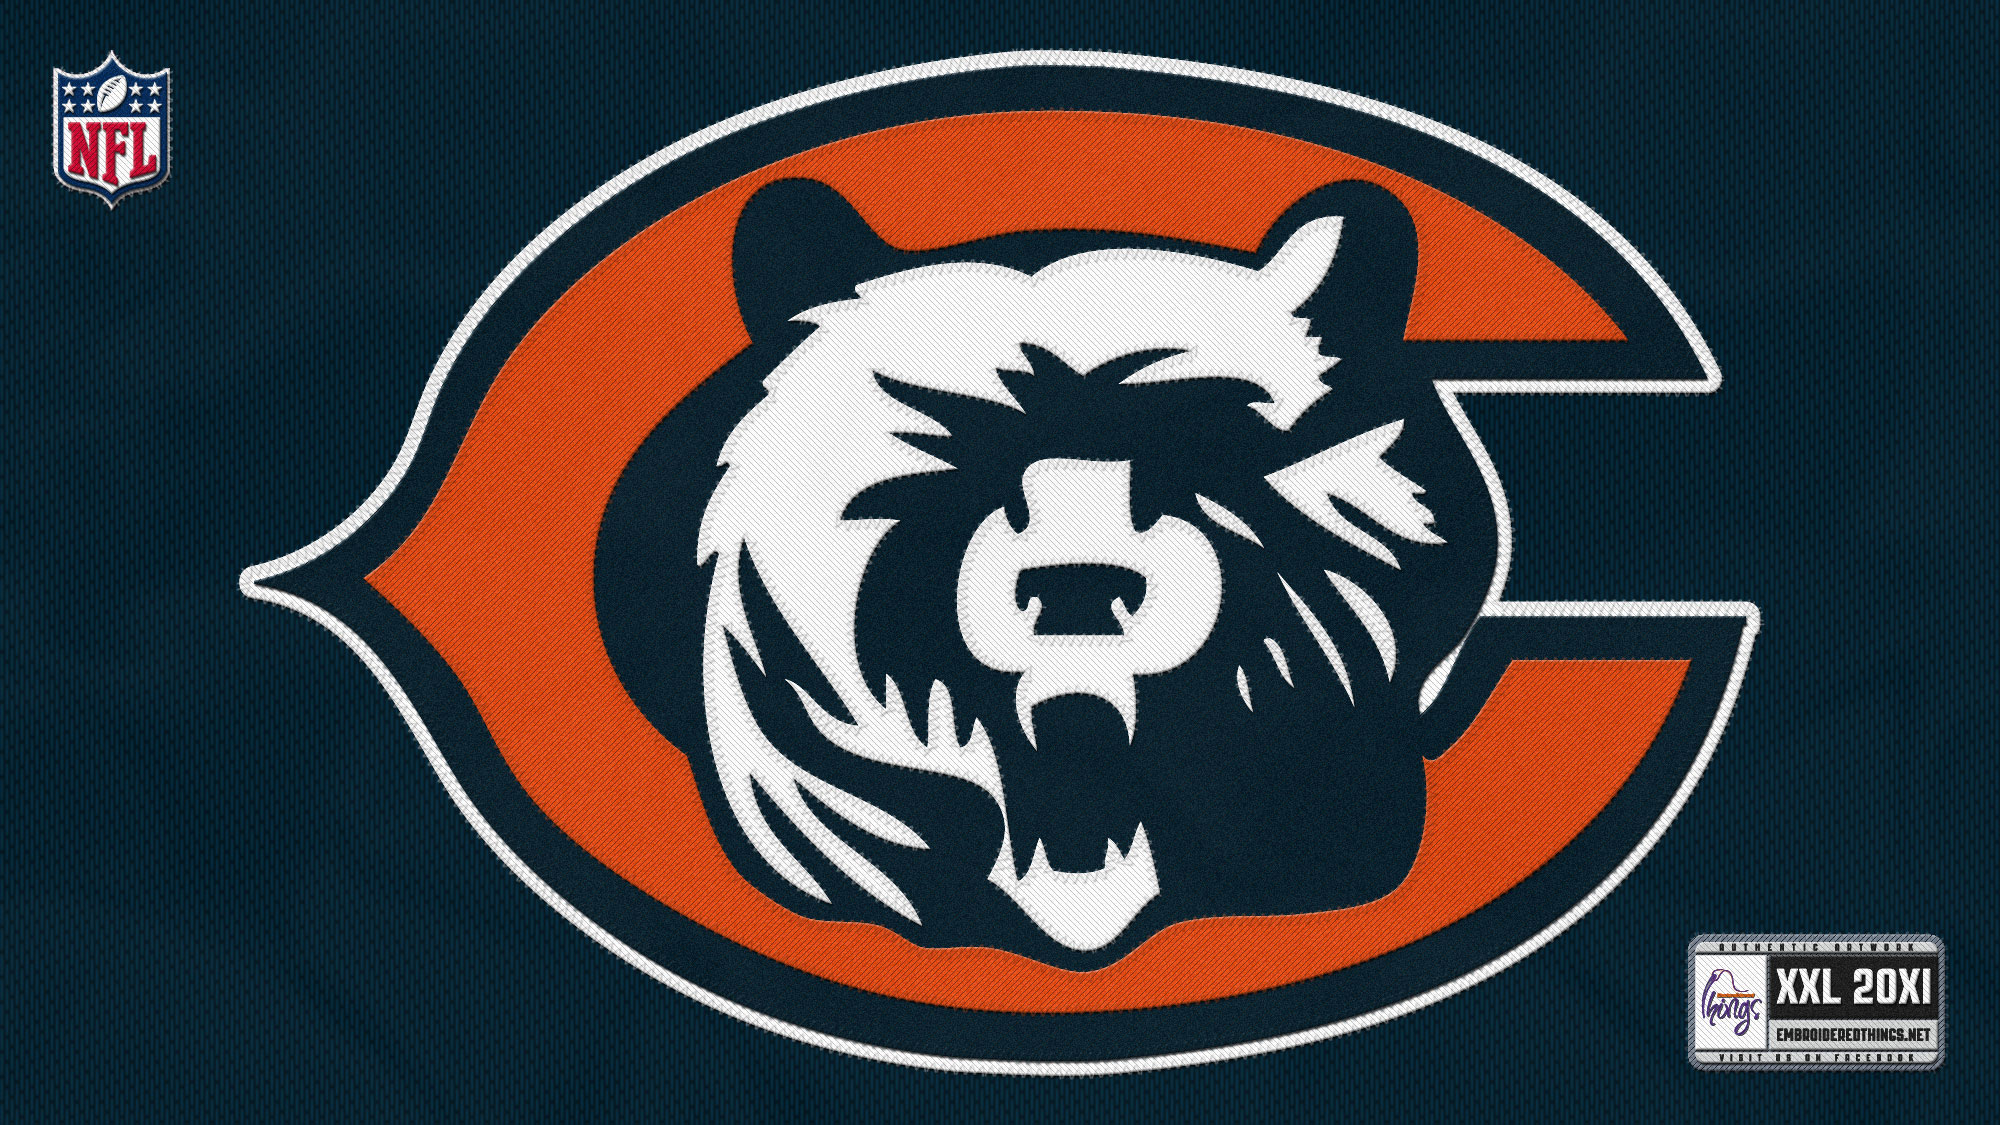 Chicago Bears Soldier Field Wallpaper 56 images